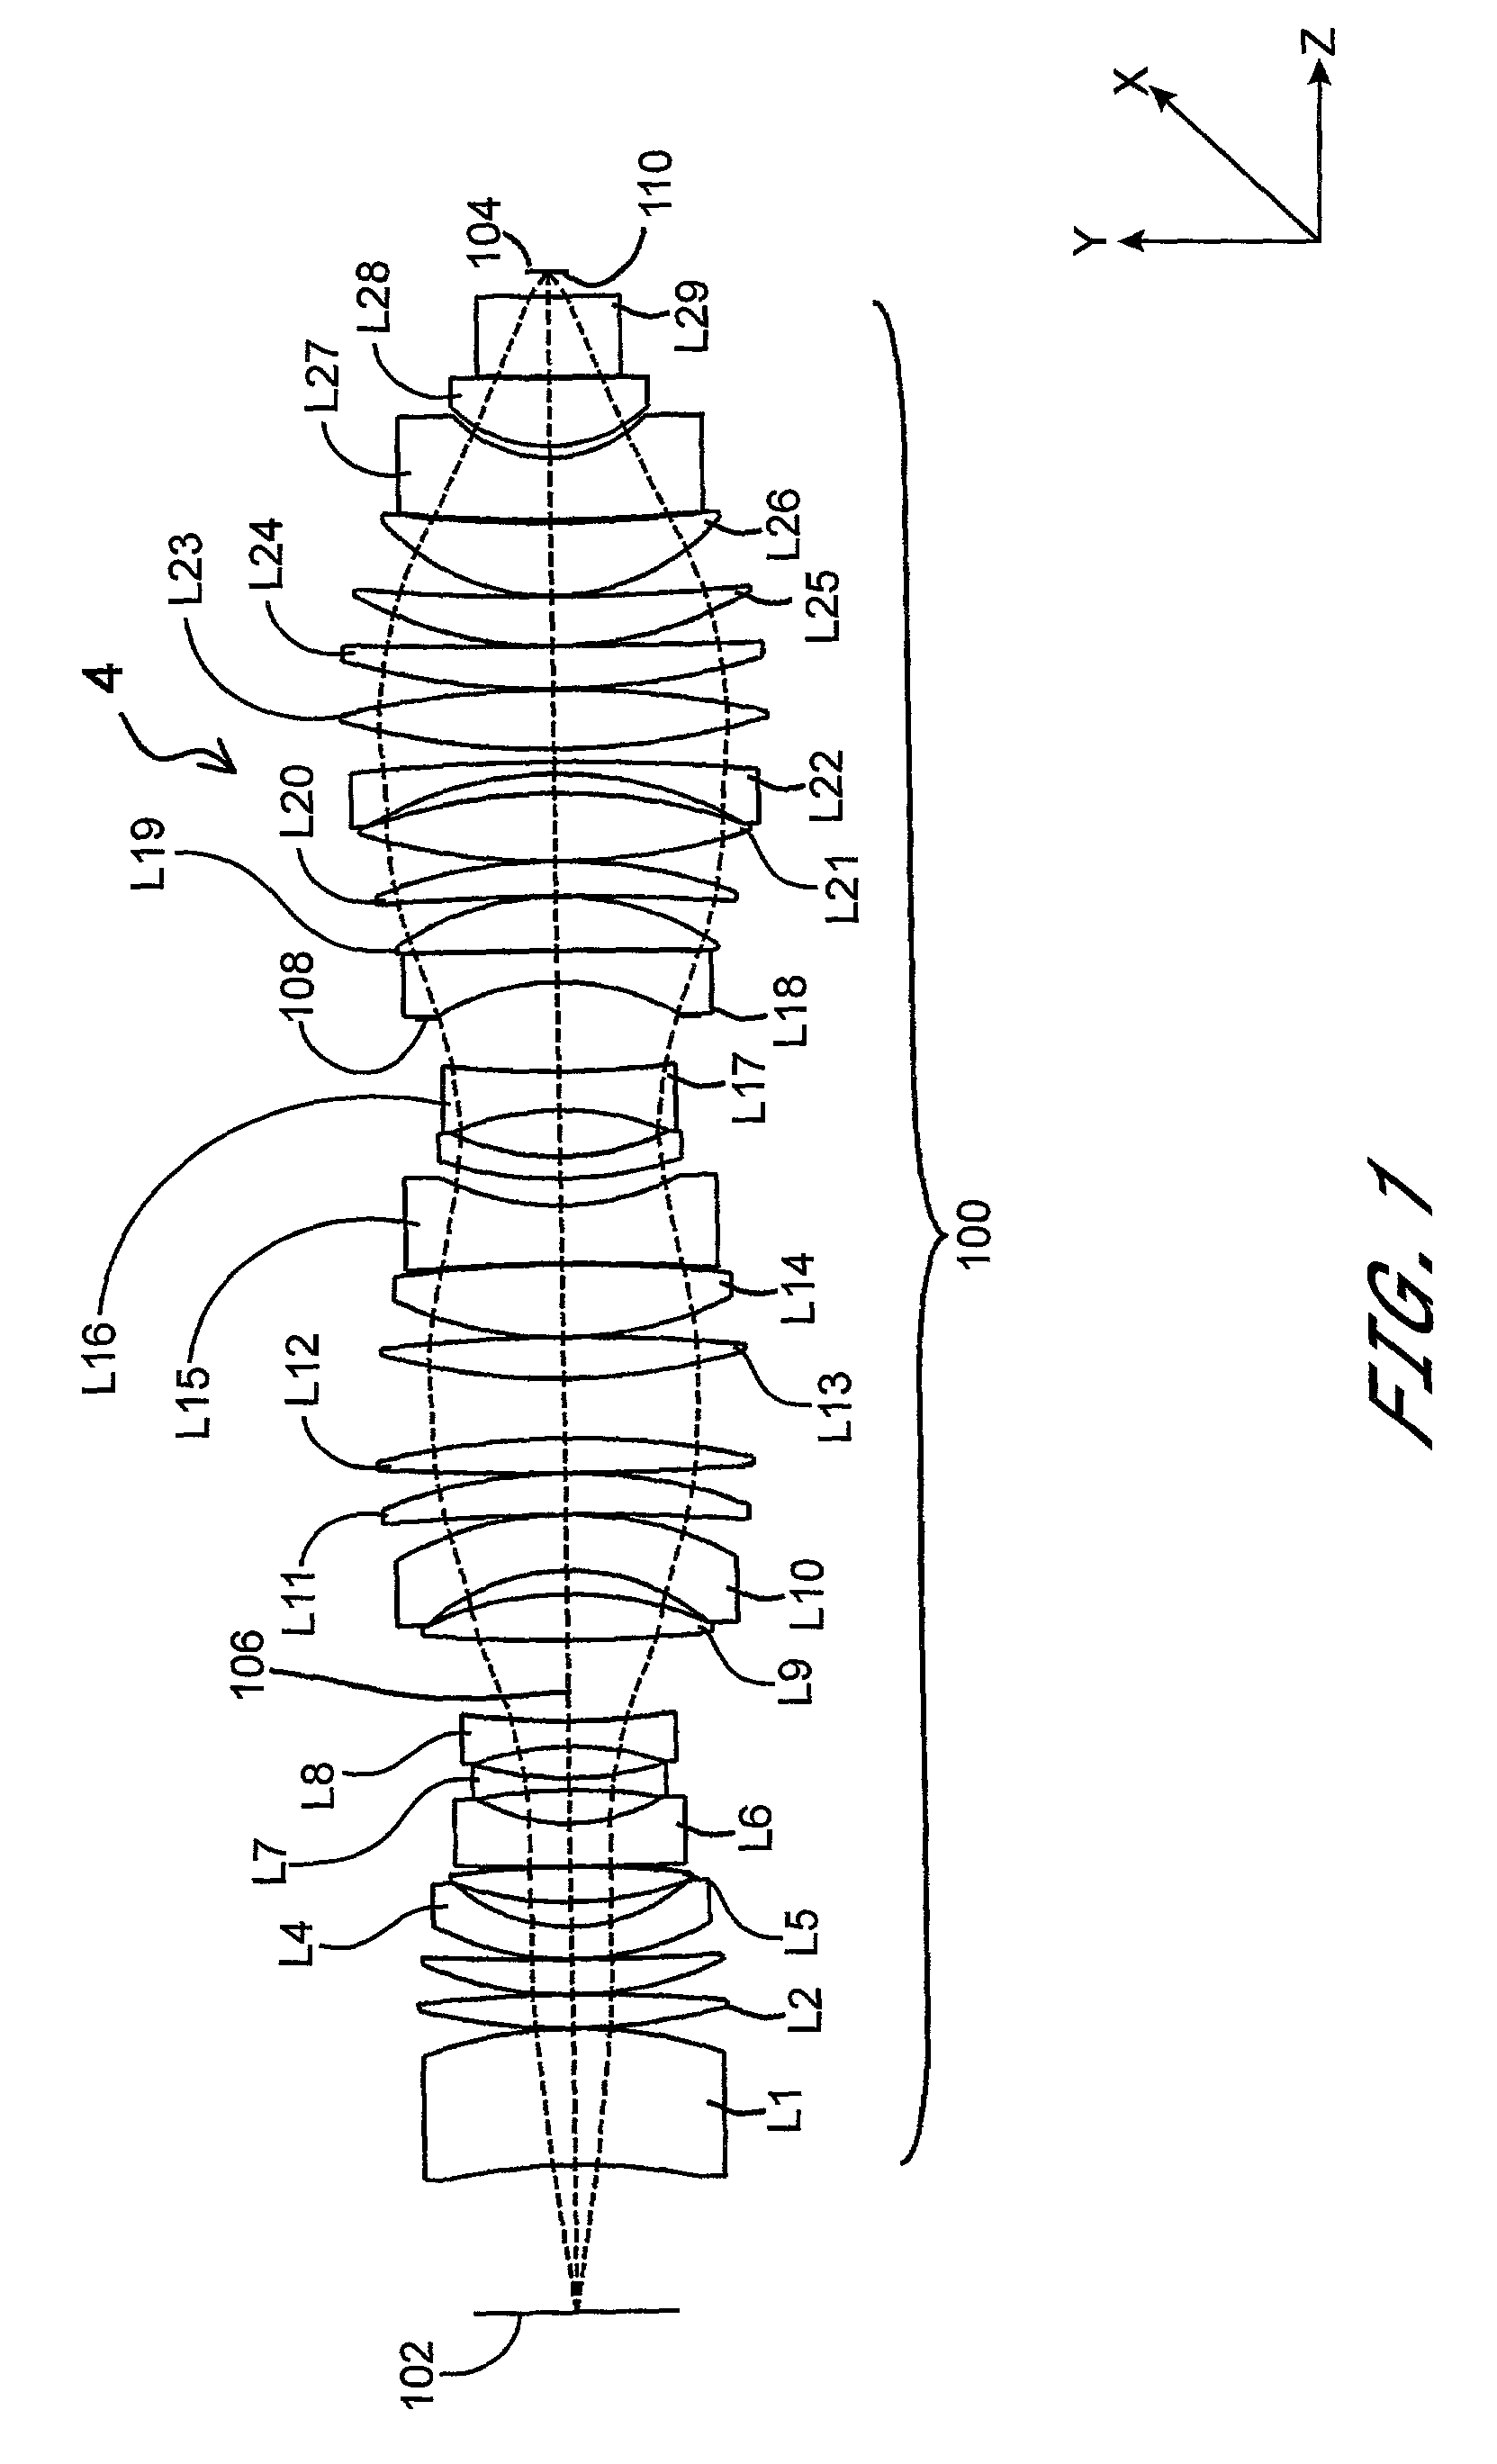 Structures and methods for reducing aberration in optical systems